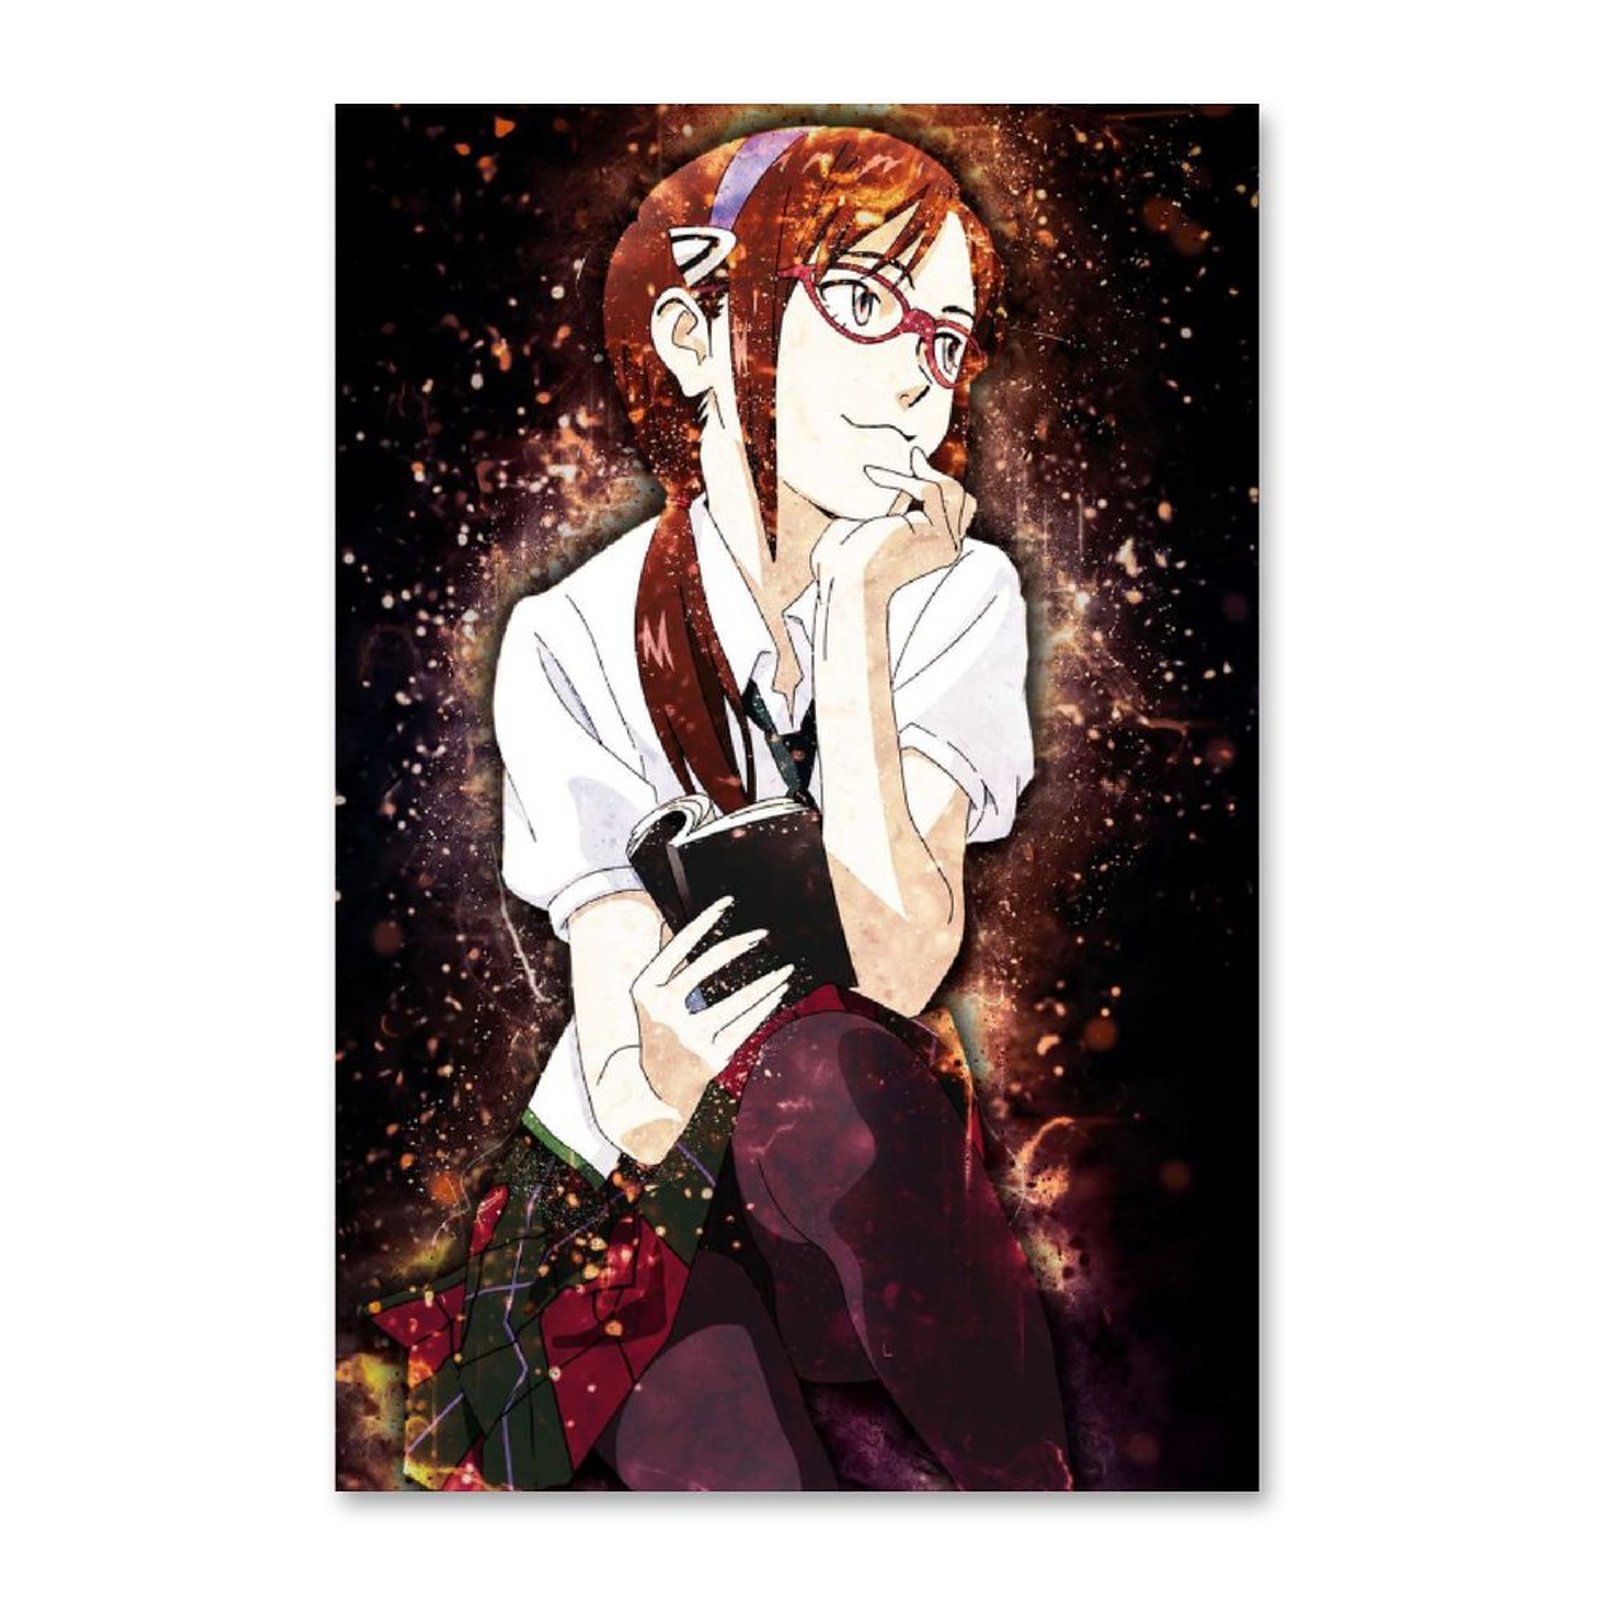 Anime Evangelion Makinami GirlCanvas Painting Wall Art Posters and Prints Wall Pictures for Living Room Decoration - Evangelion Shop